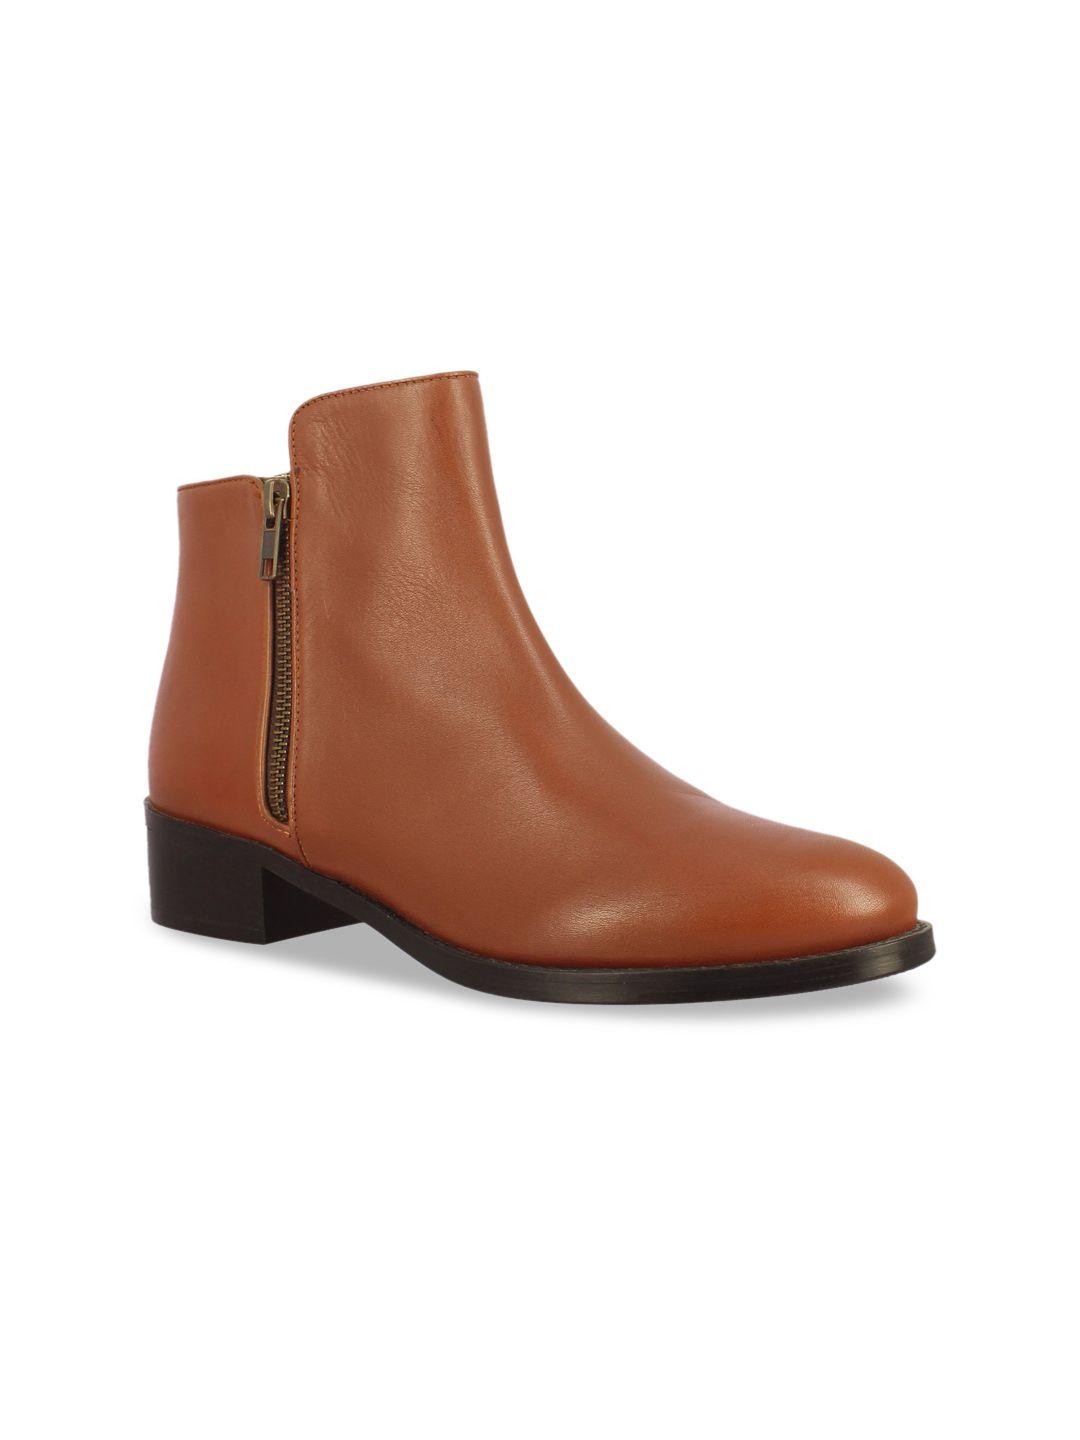 saint-g-women-tan-brown-leather-ankle-boots